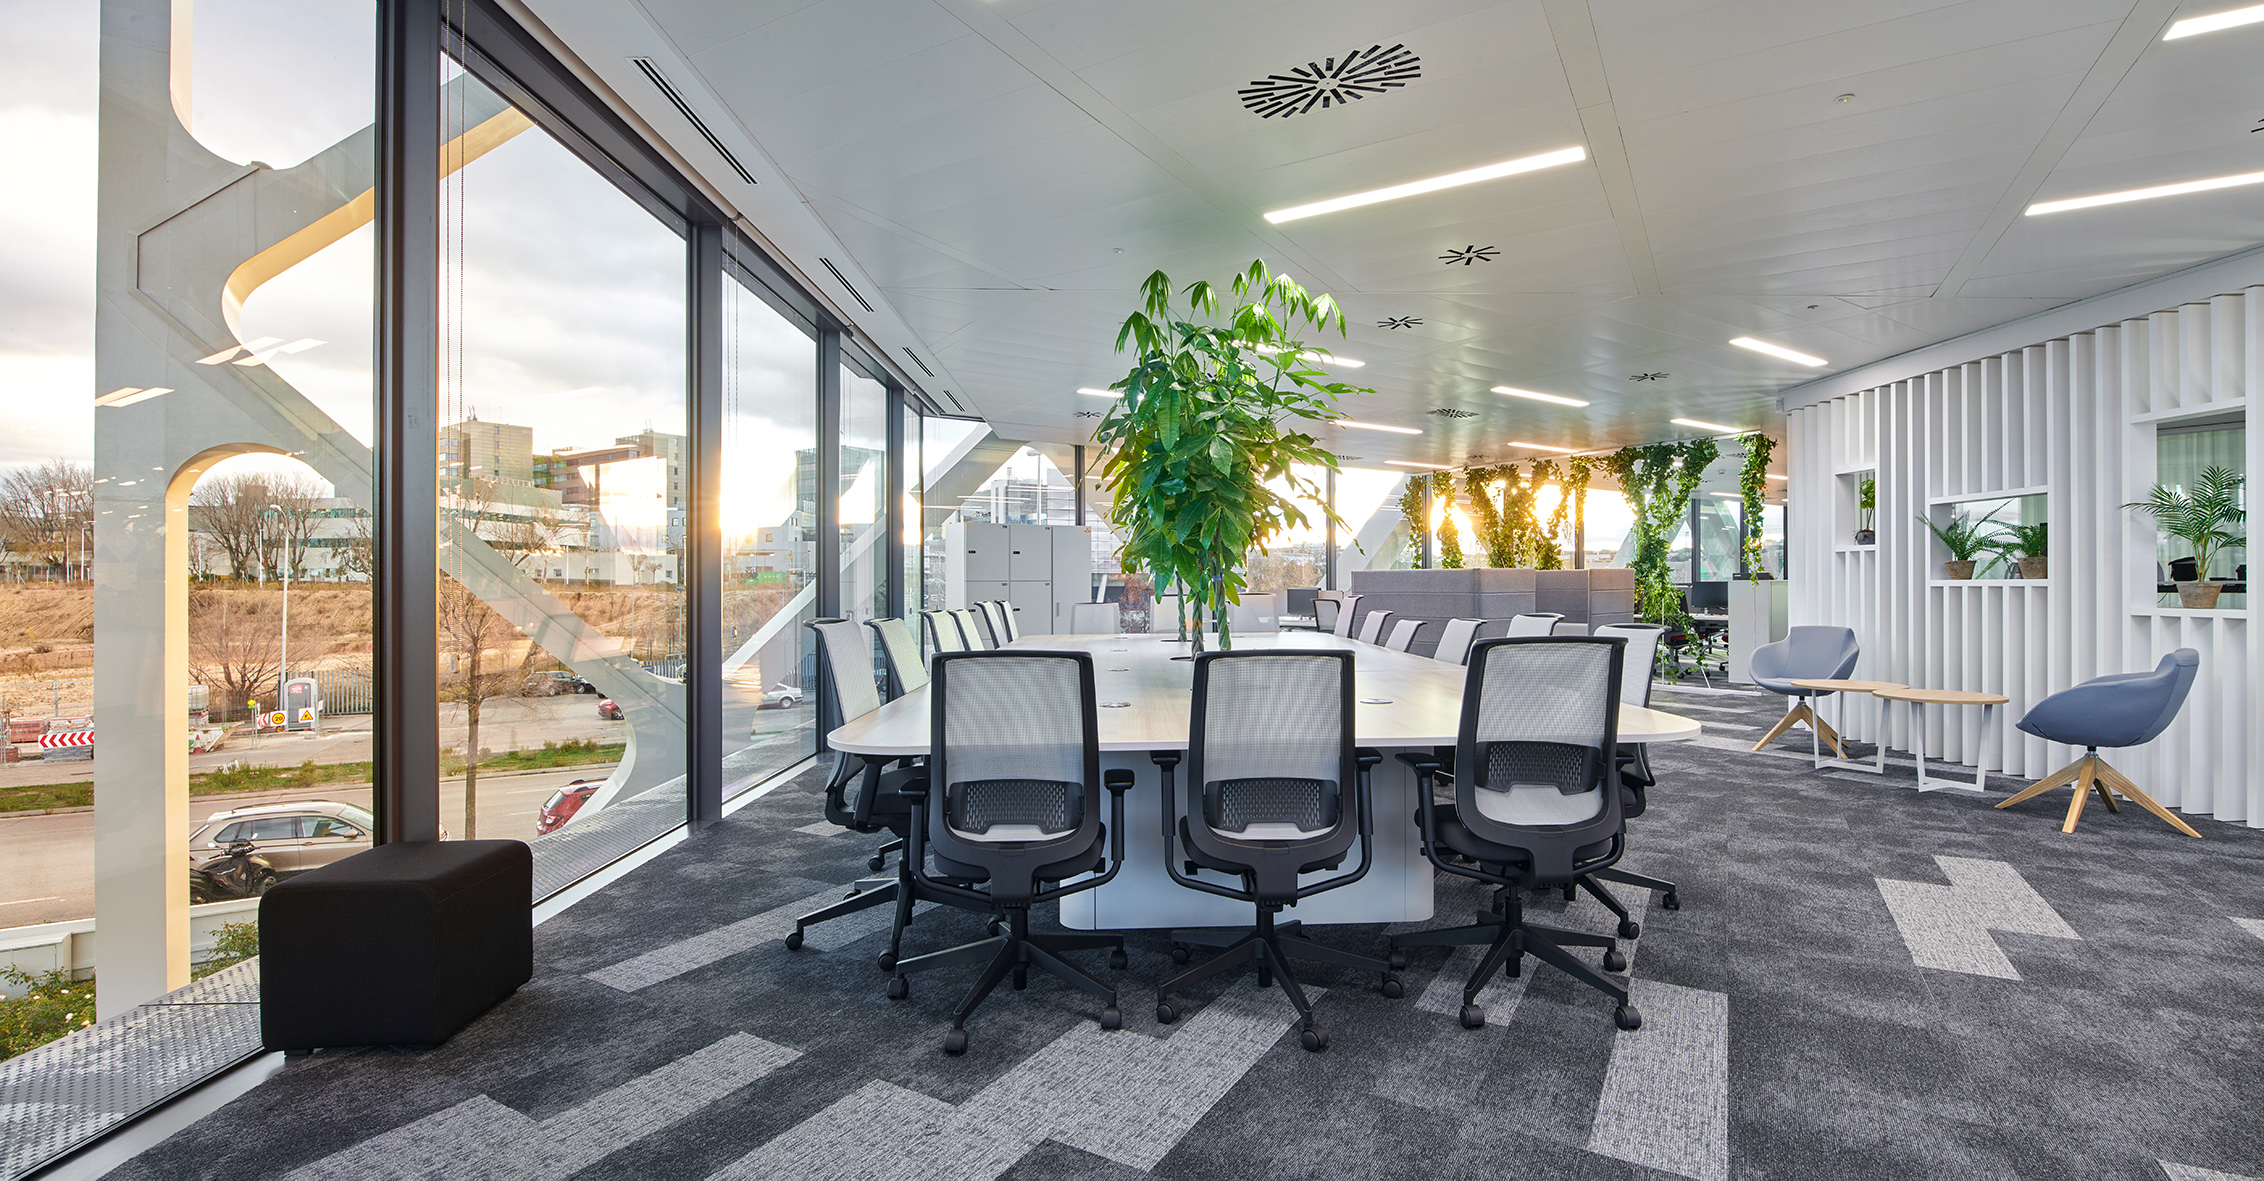 Using natural light instead of bright artificial lighting makes the Lenovo office in Madrid, Spain more comfortable for all.